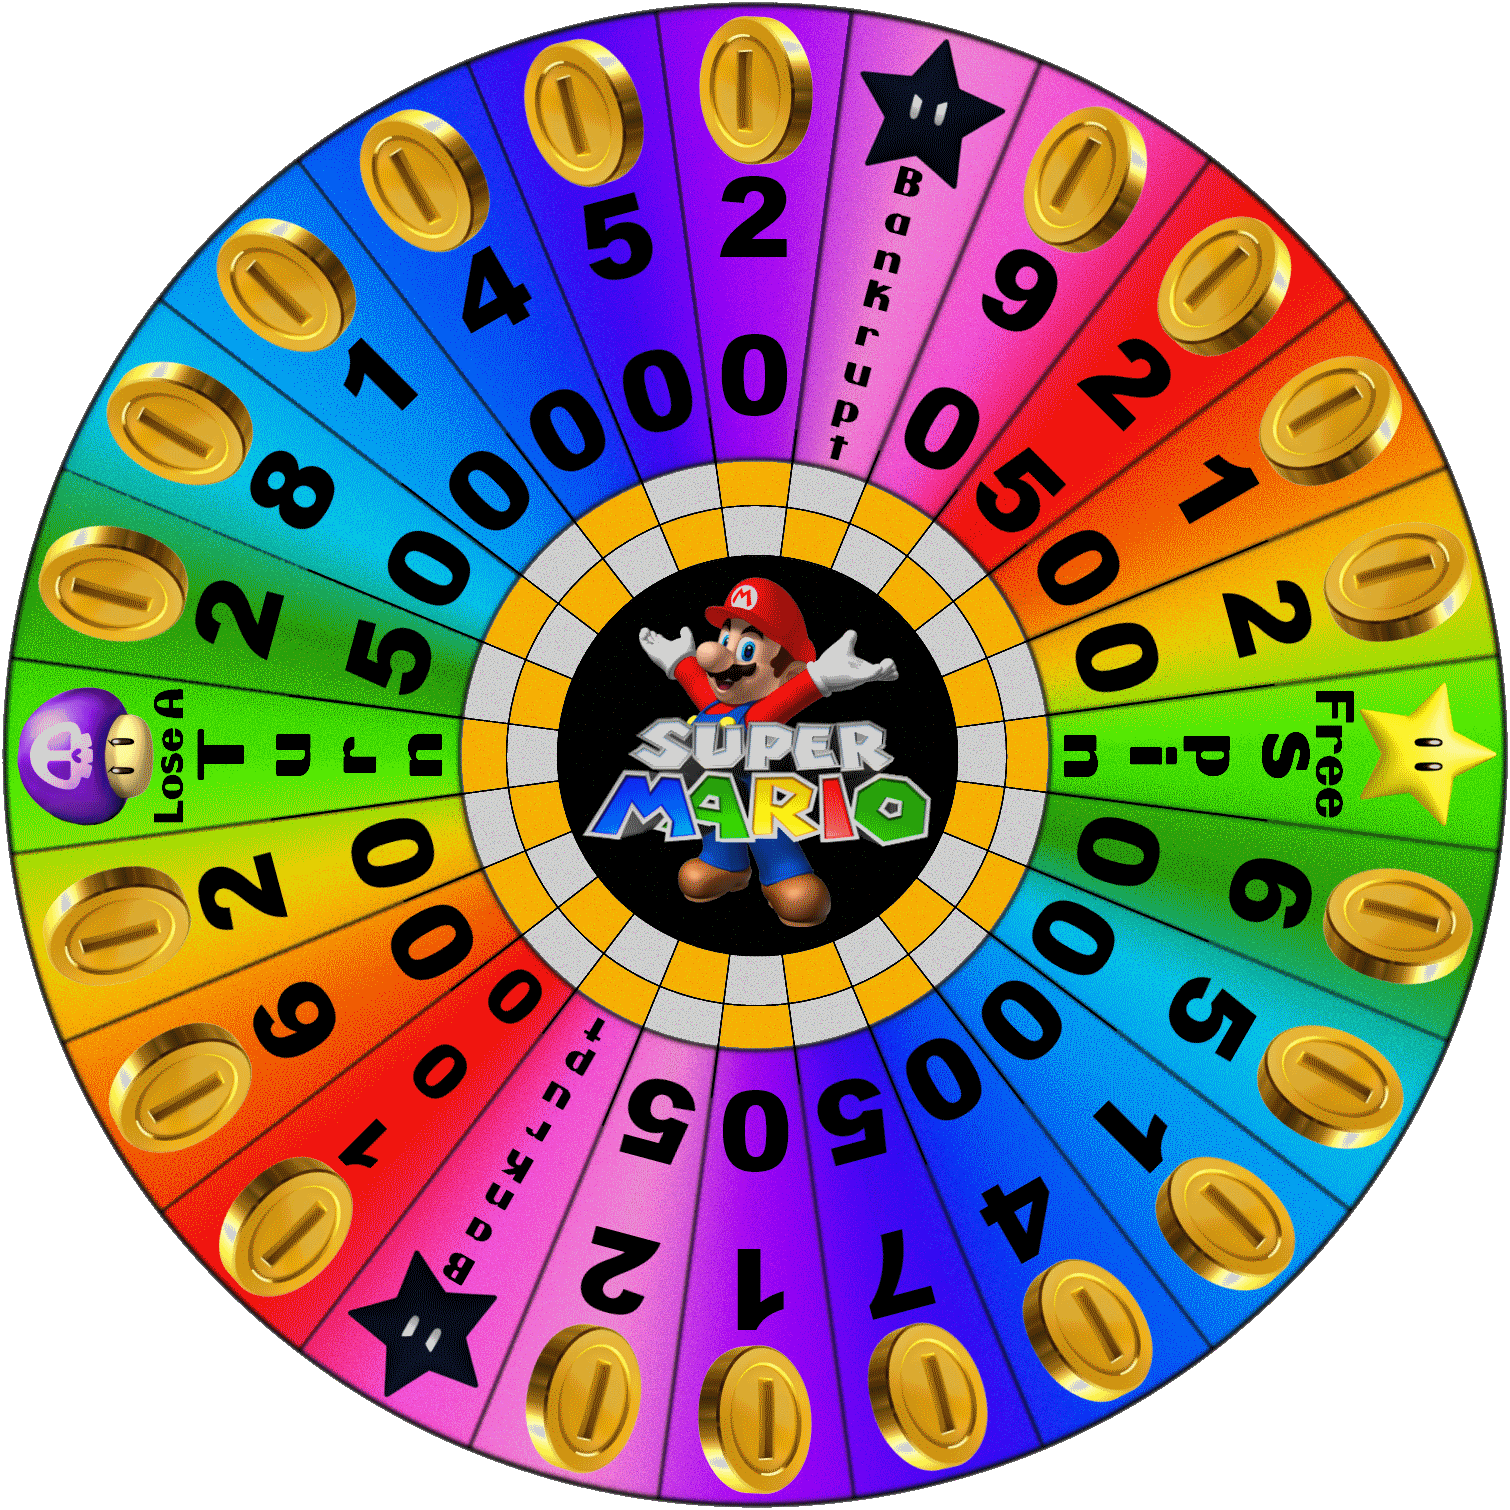 Prize template quantumgaming co. Wheel clipart spinning wheel